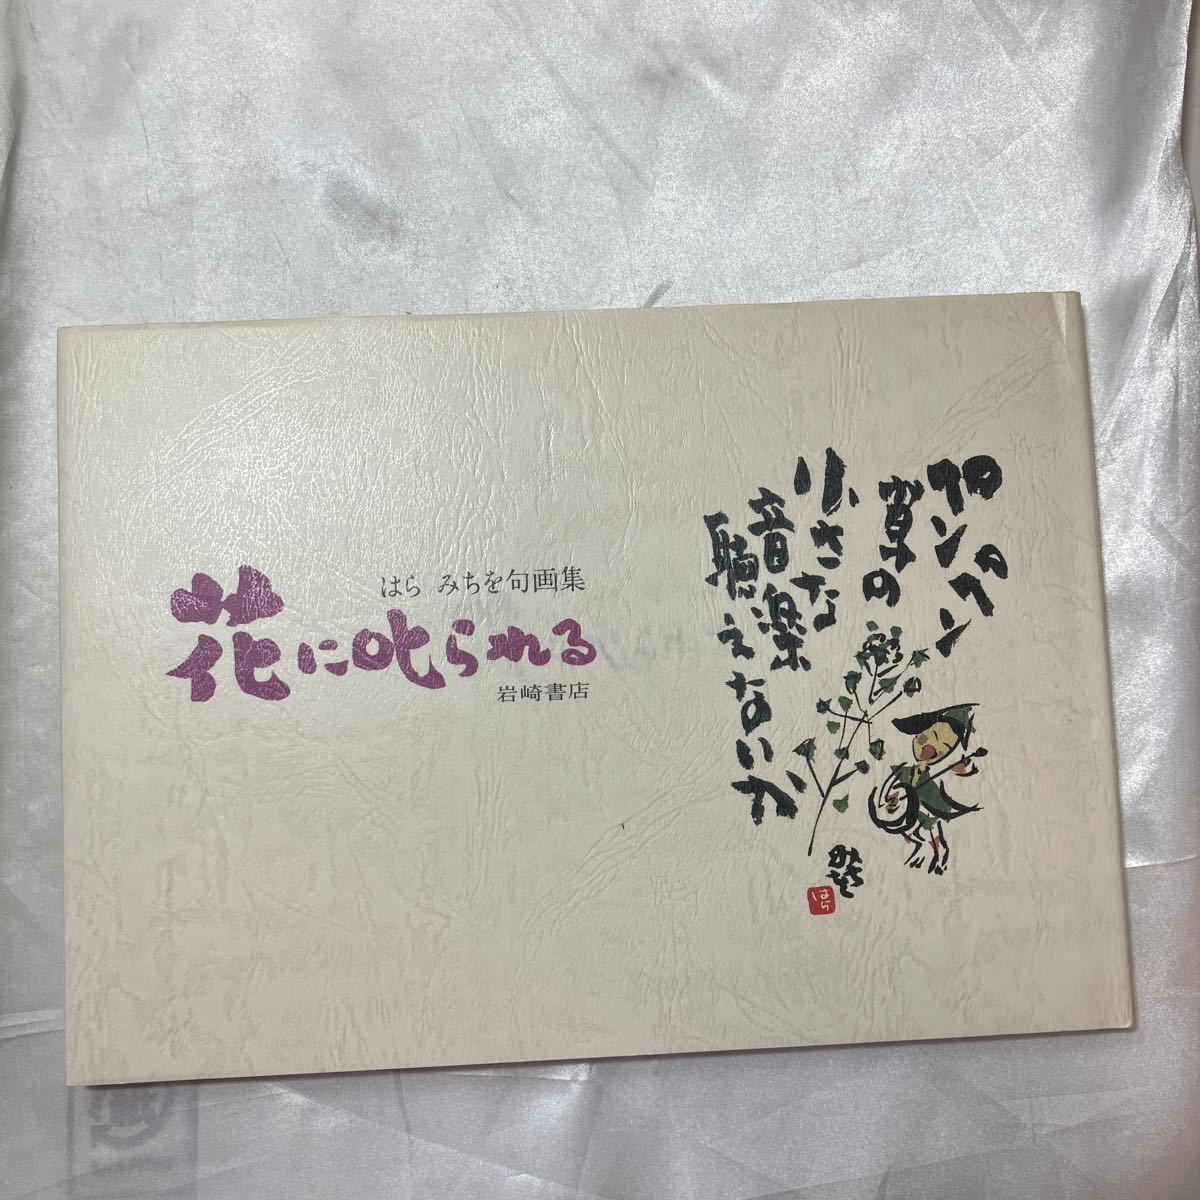 zaa-464♪Scolded by Flowers - Haramichio Haiku and Art Collection Extra Large Haramichio (Auteur) Iwasaki Shoten (1989/11/1), Peinture, Livre d'art, Collection, Livre d'art